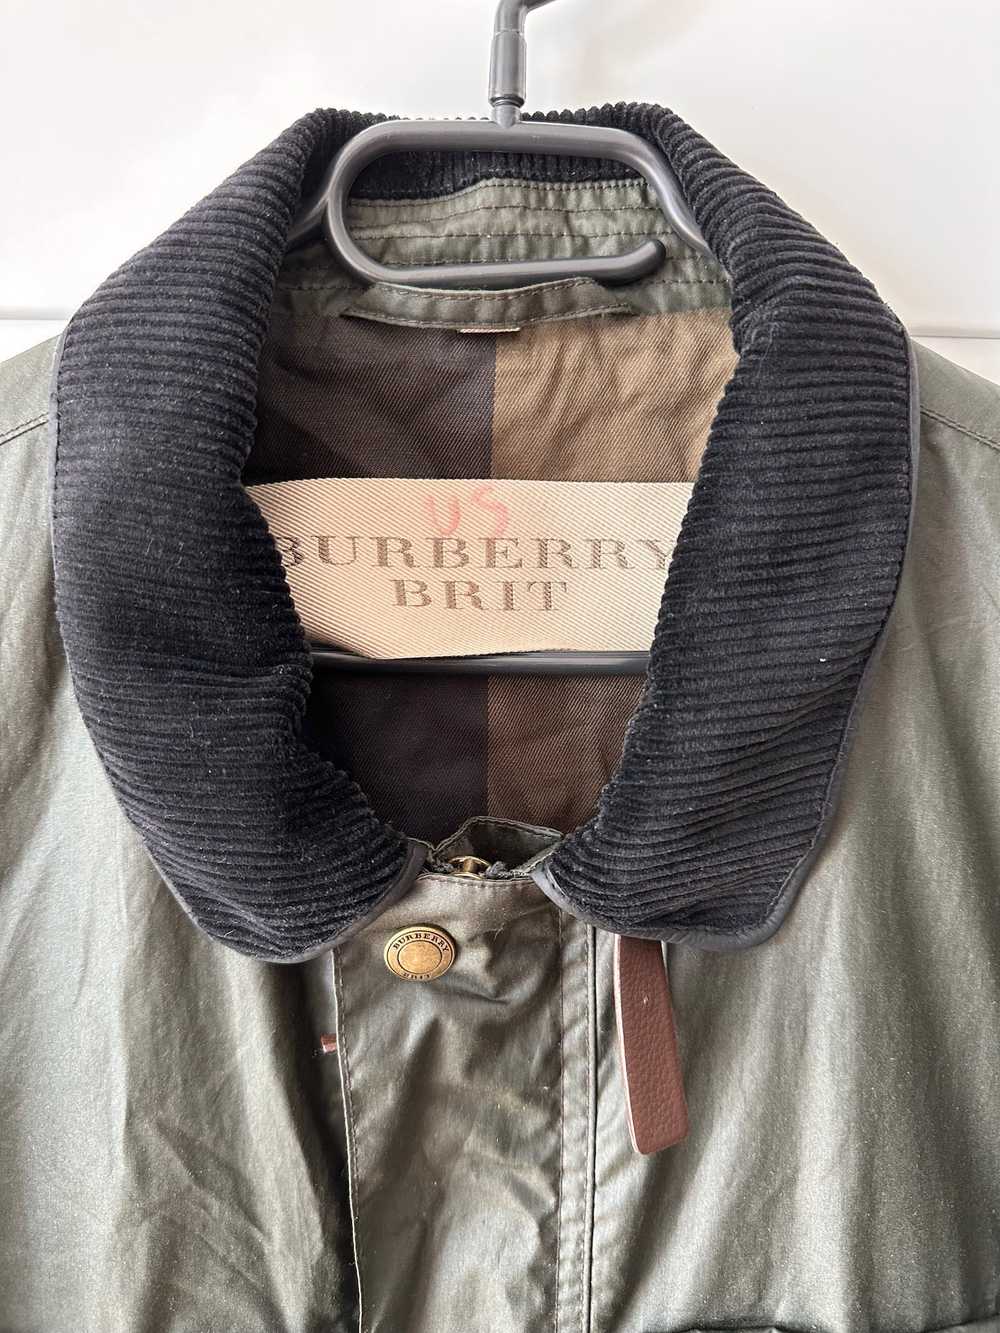 Burberry × Rare × Waxed BURBERRY BRIT waxed multi… - image 2